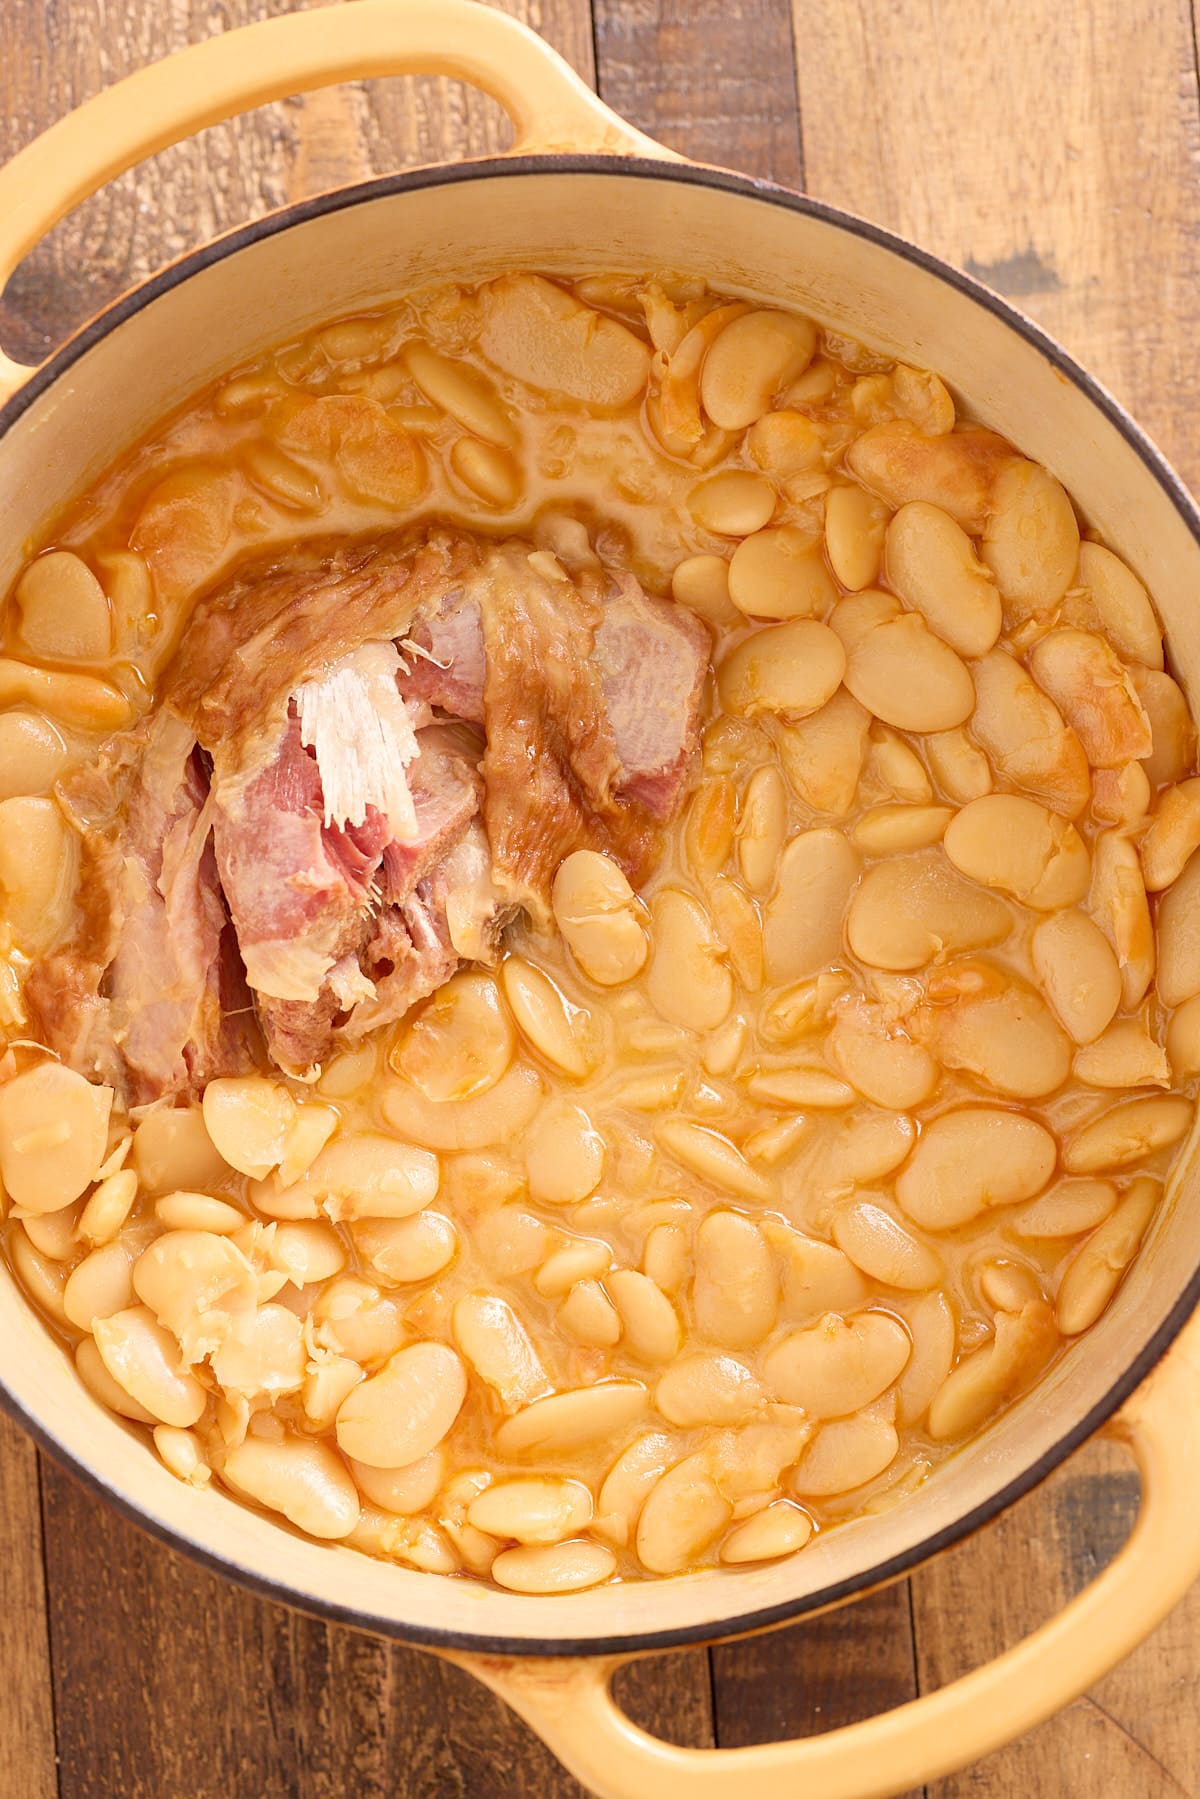 Dutch oven filled with cooked butterbeans and smoked turkey drumstick